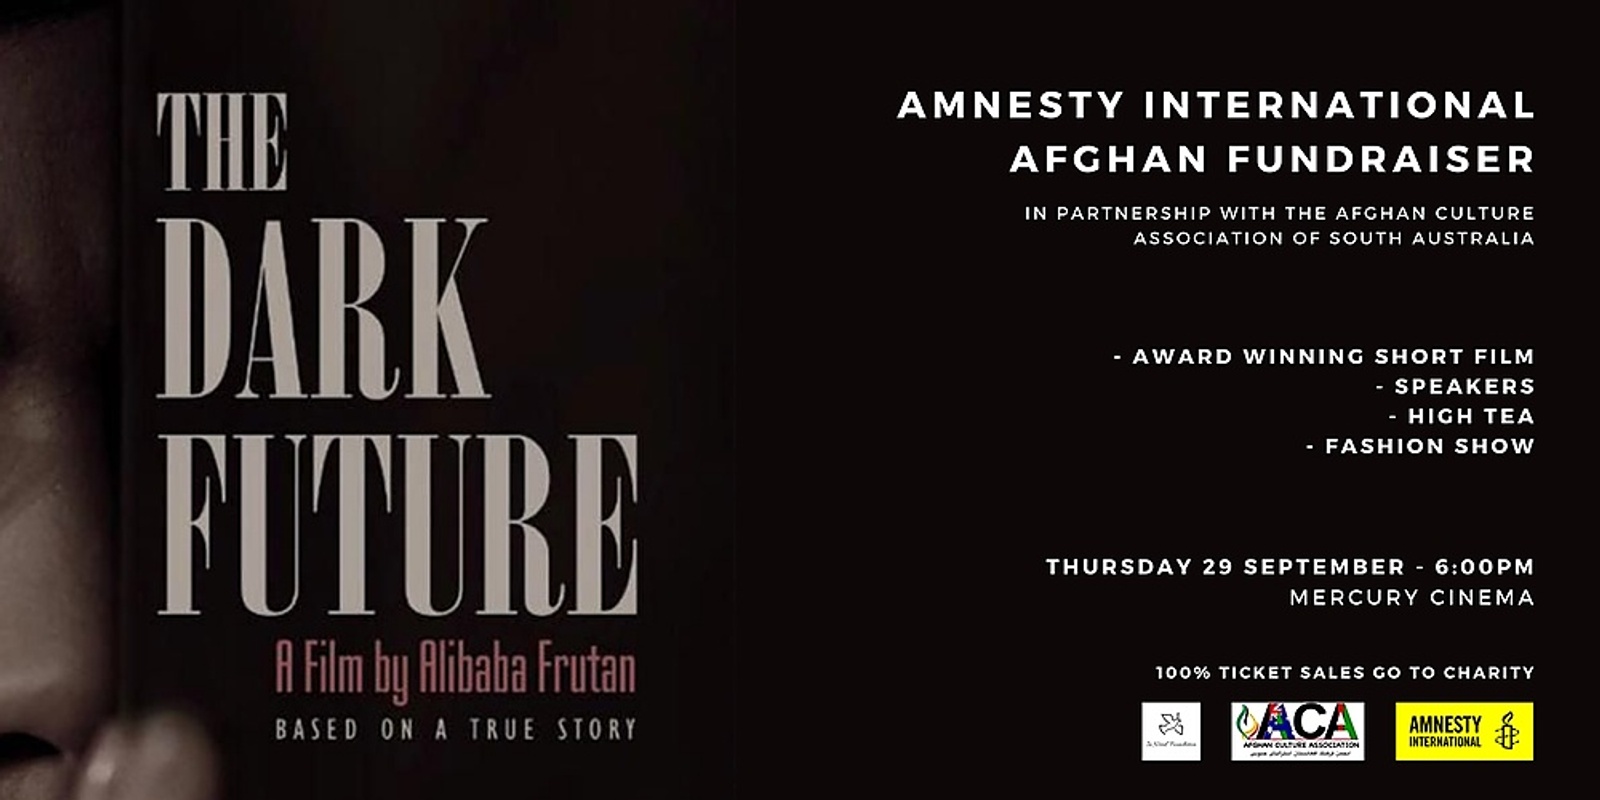 Banner image for ' The Dark Future' Afghan Fundraiser